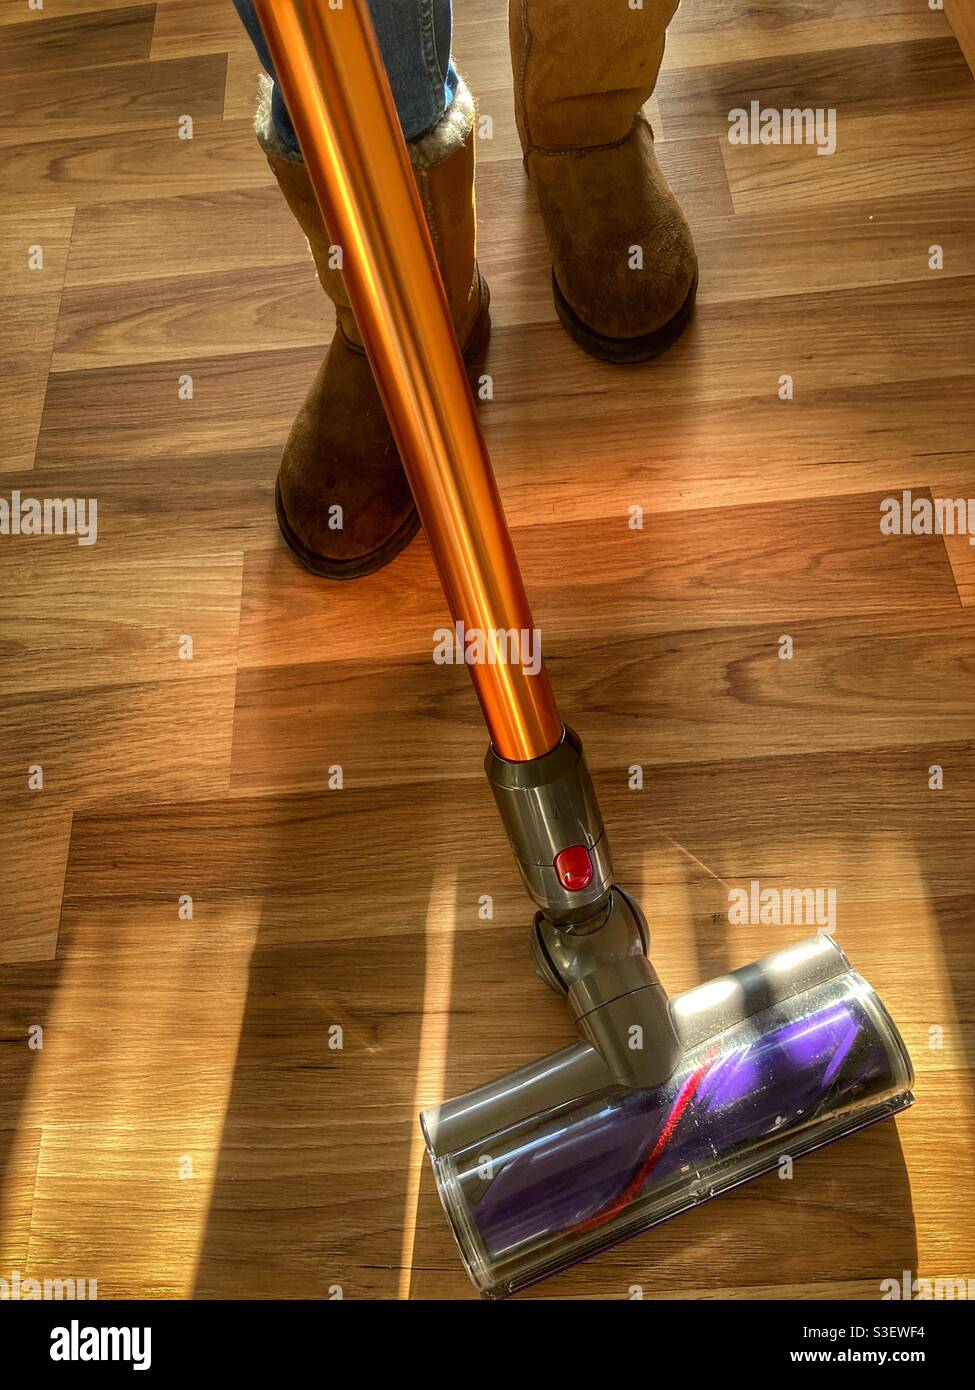 Household chores. Person vacuuming wooden floor. Stock Photo